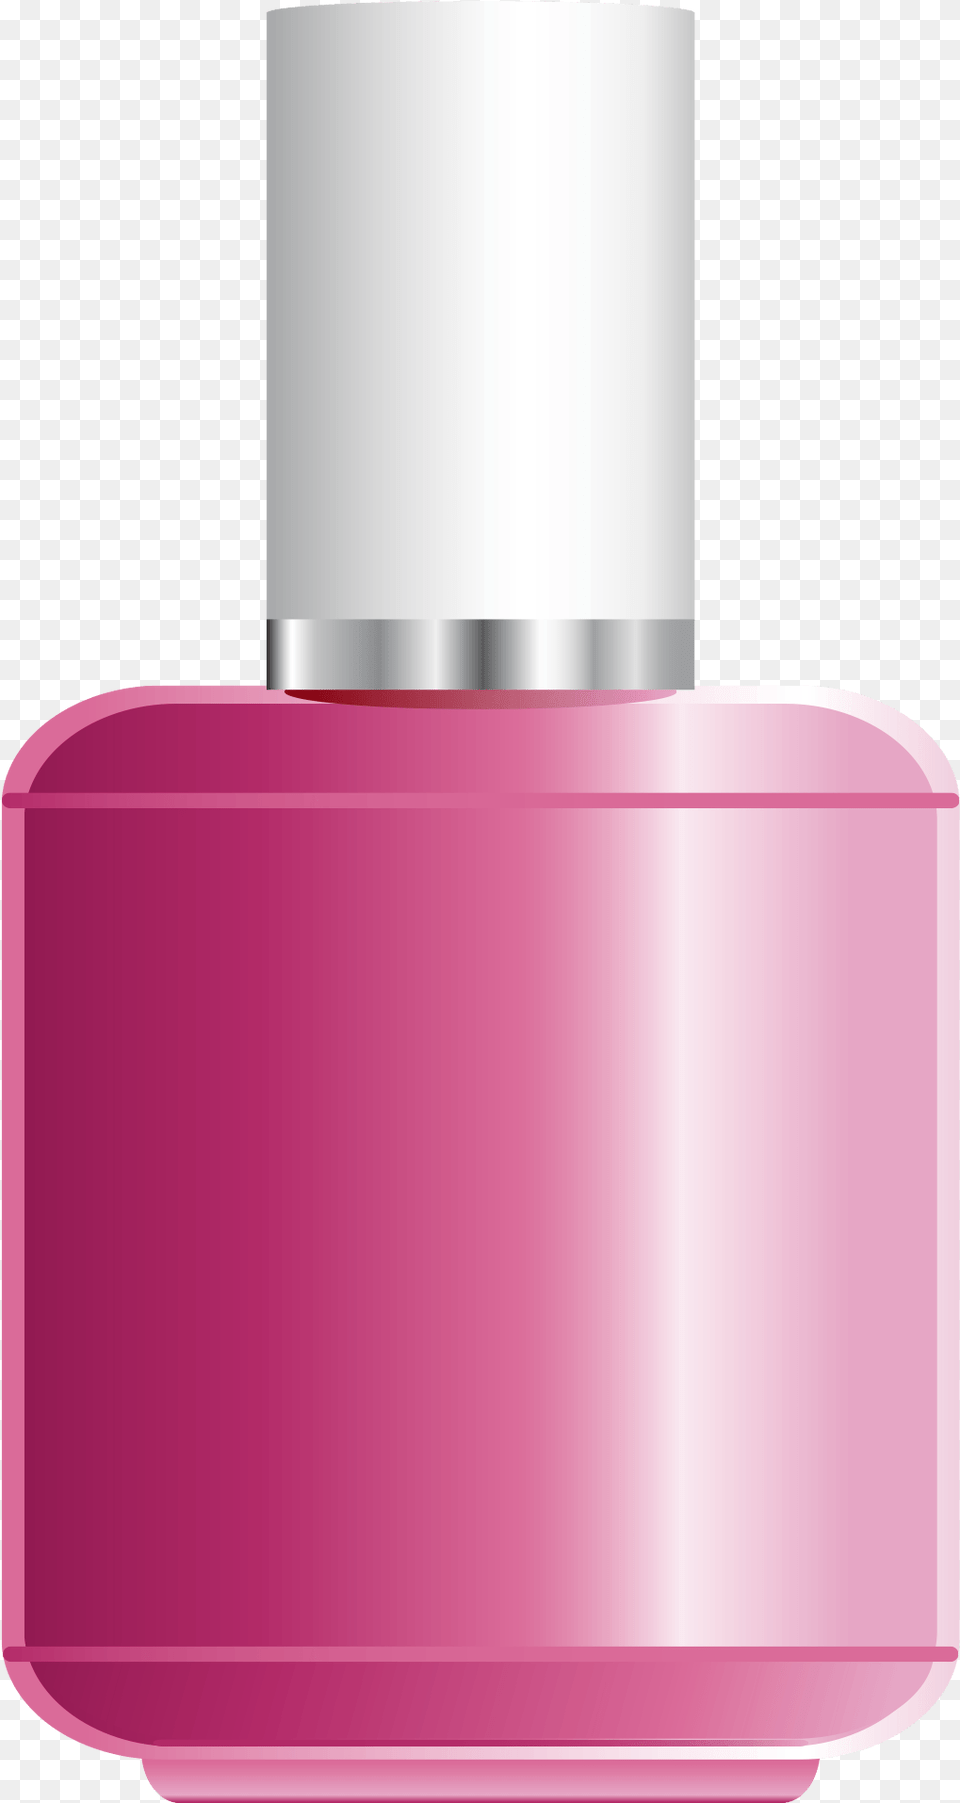 Clipart Of Nail Polish Bottle Tips And Clipart Of Nail Pink Nail Polish Clipart, Cosmetics, Lotion Free Png